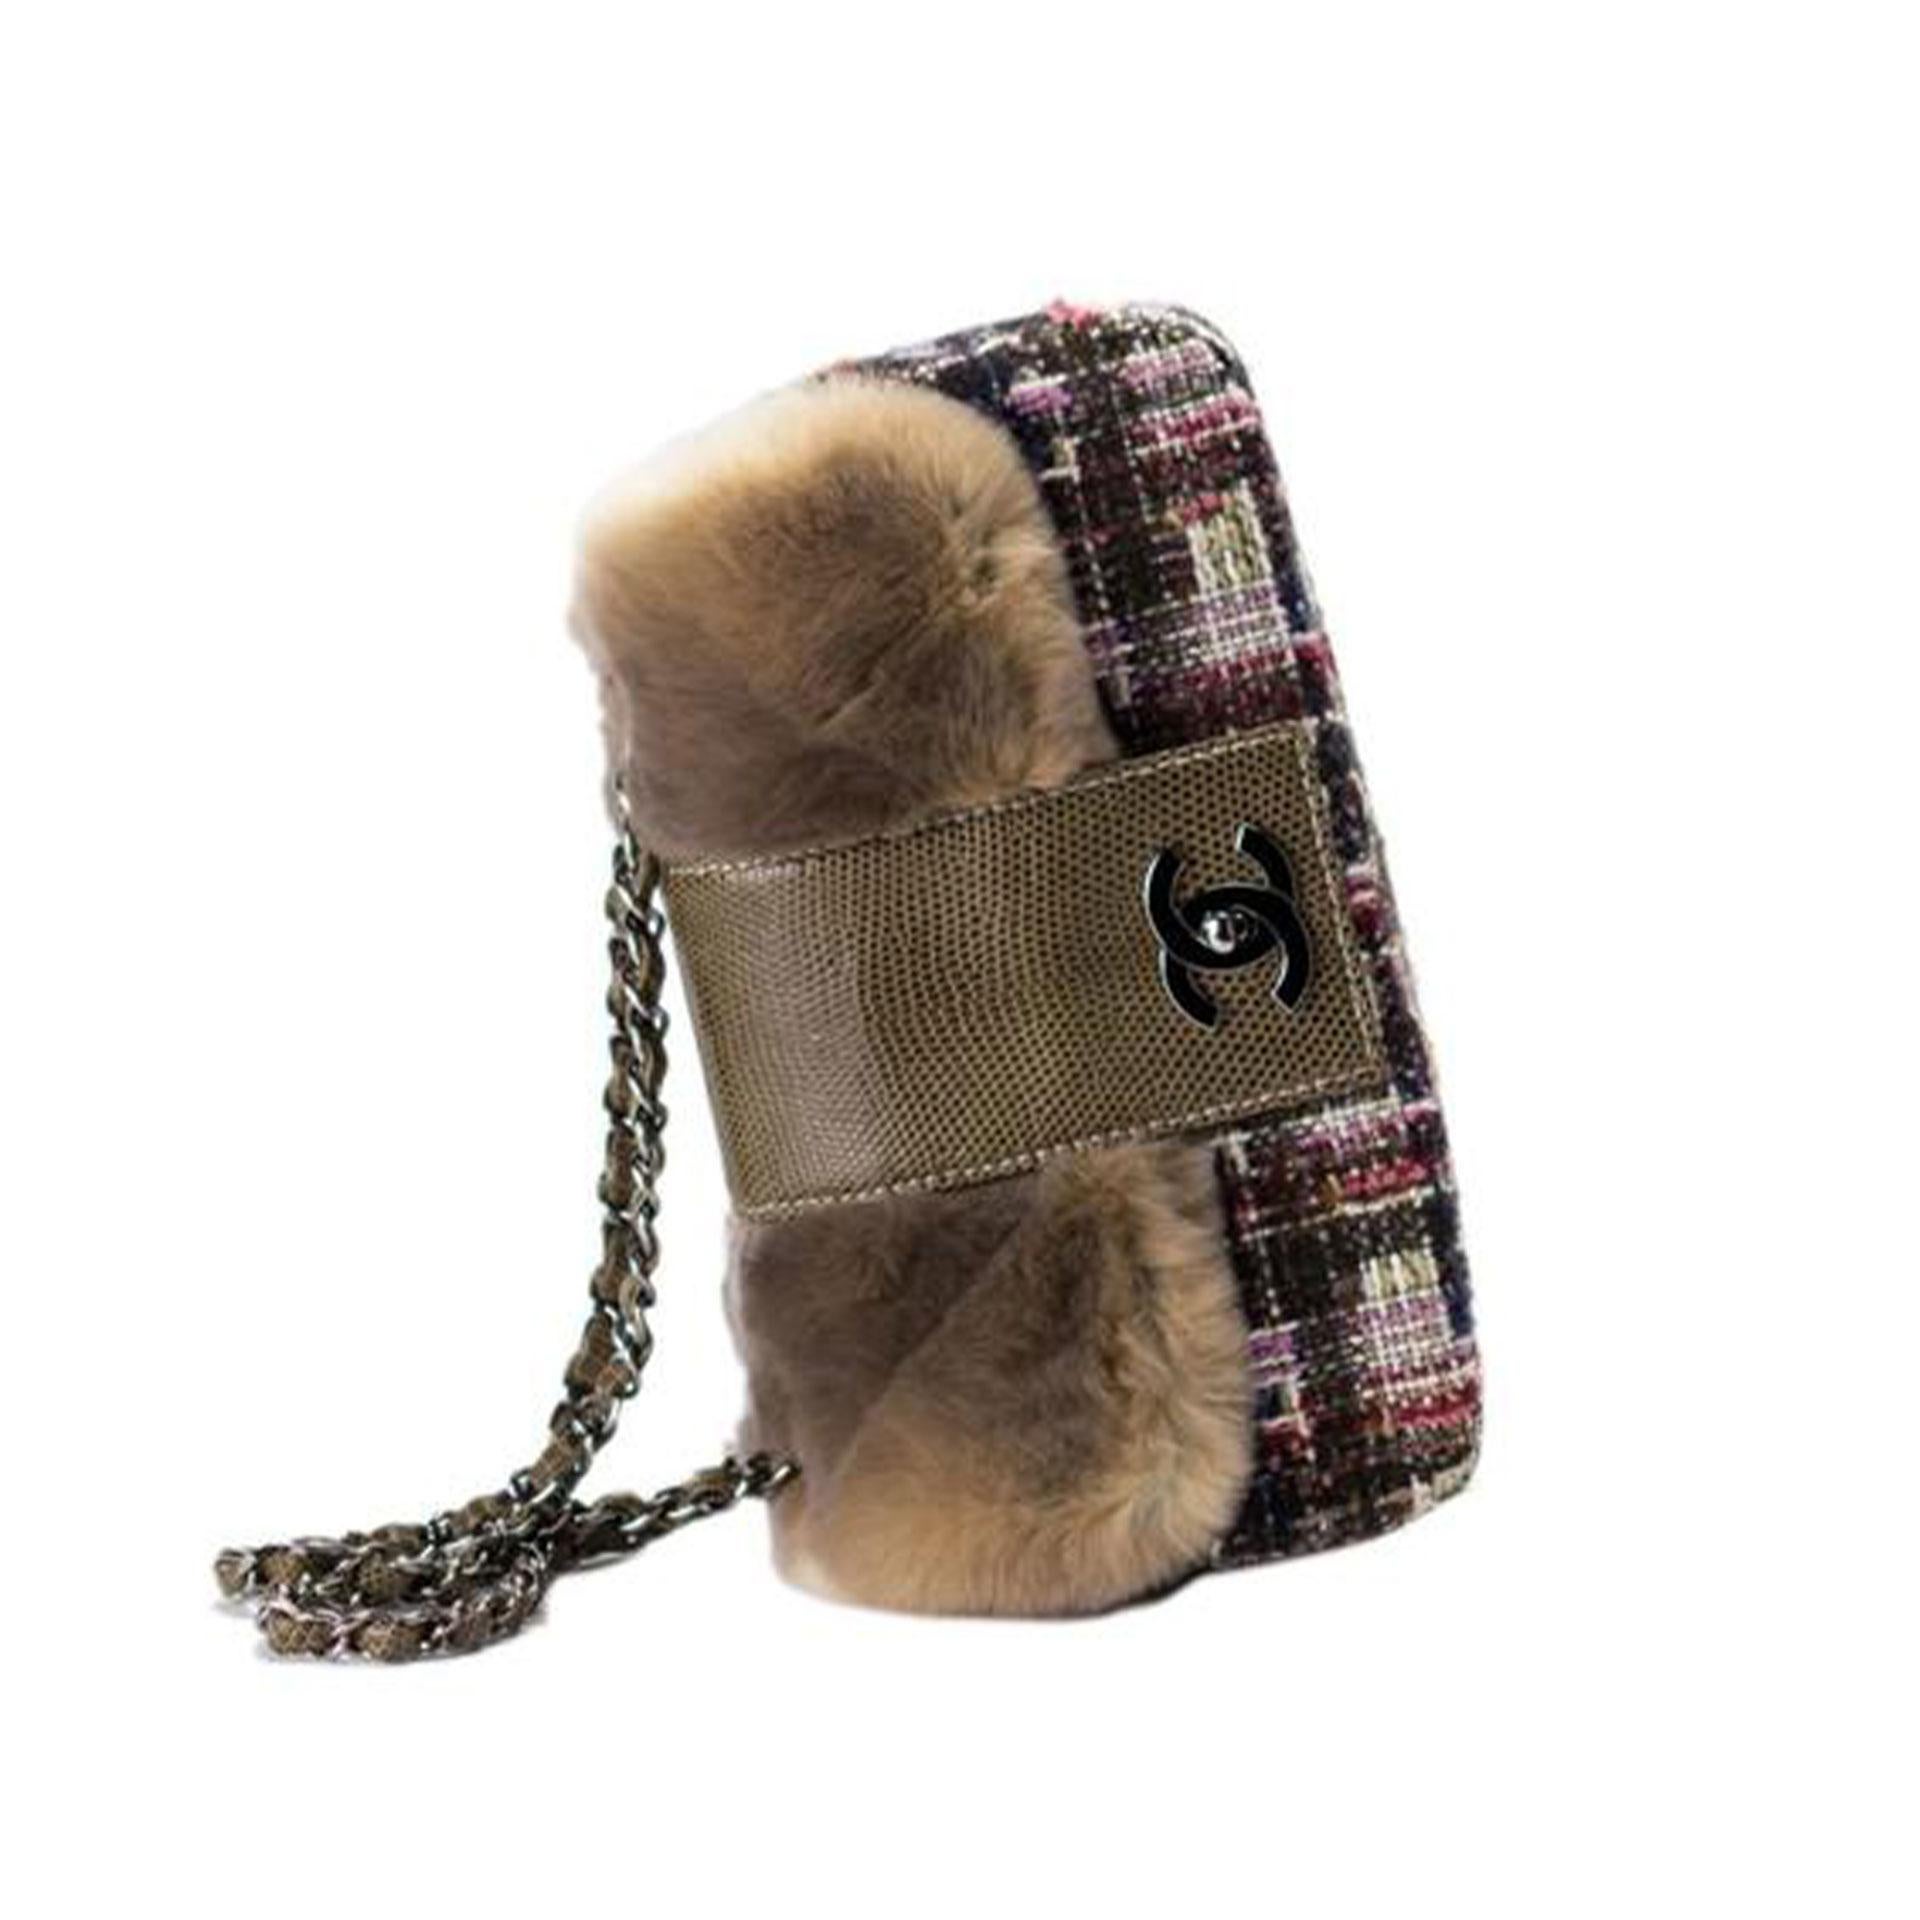 Chanel Classic Flap Rare Limited Edition & Lizard Multi-color Brown Fur Bag For Sale 1